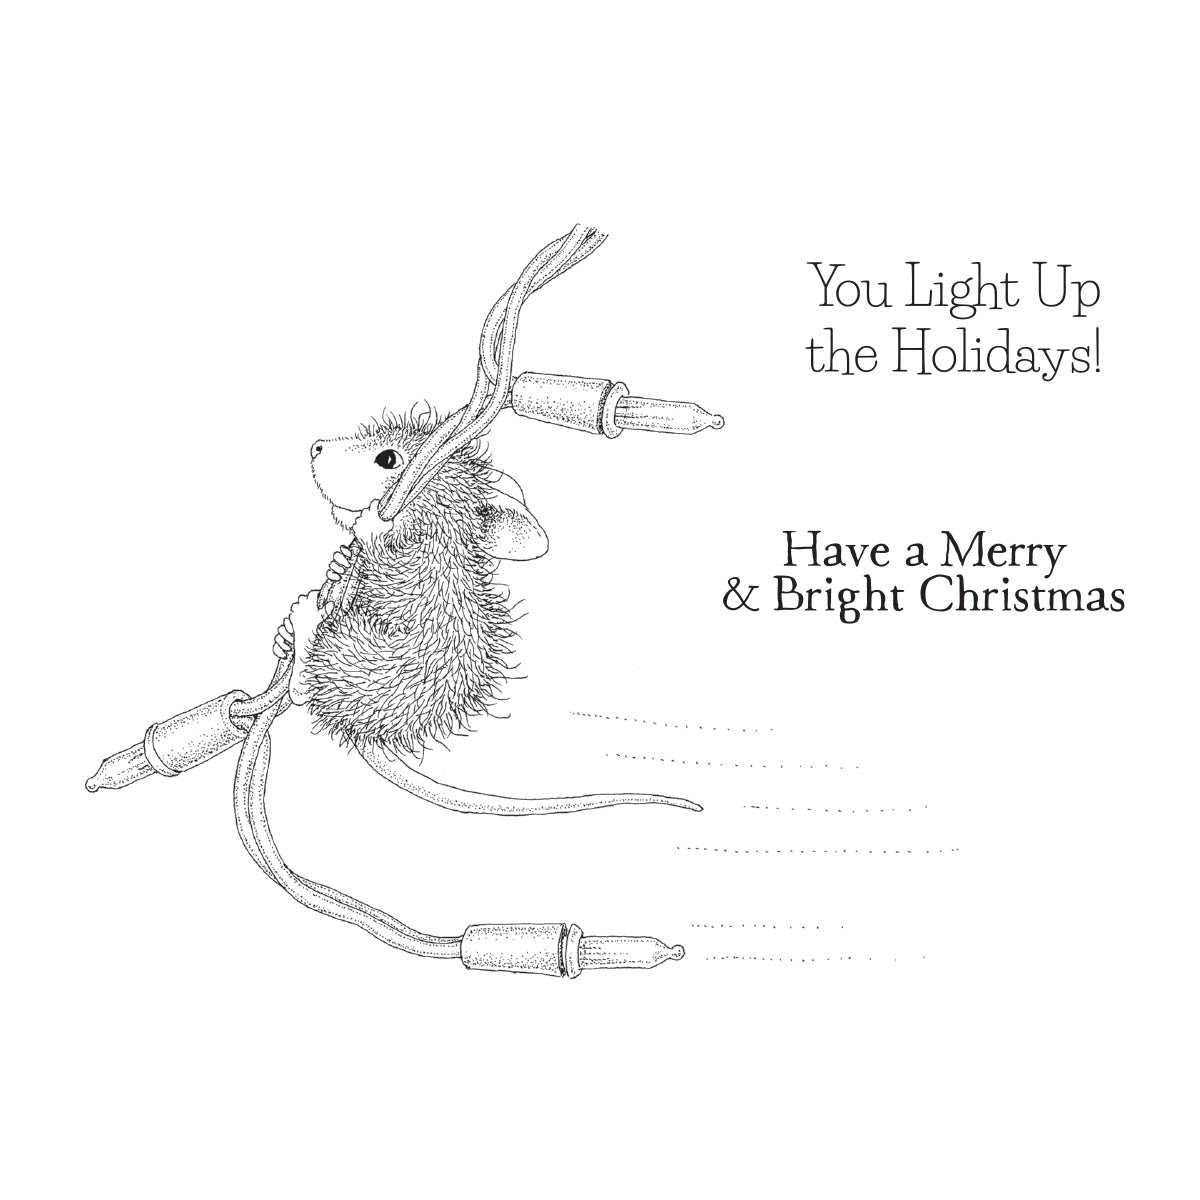 Merry & Bright Cling Rubber Stamp Set from the House-Mouse Holiday Collection